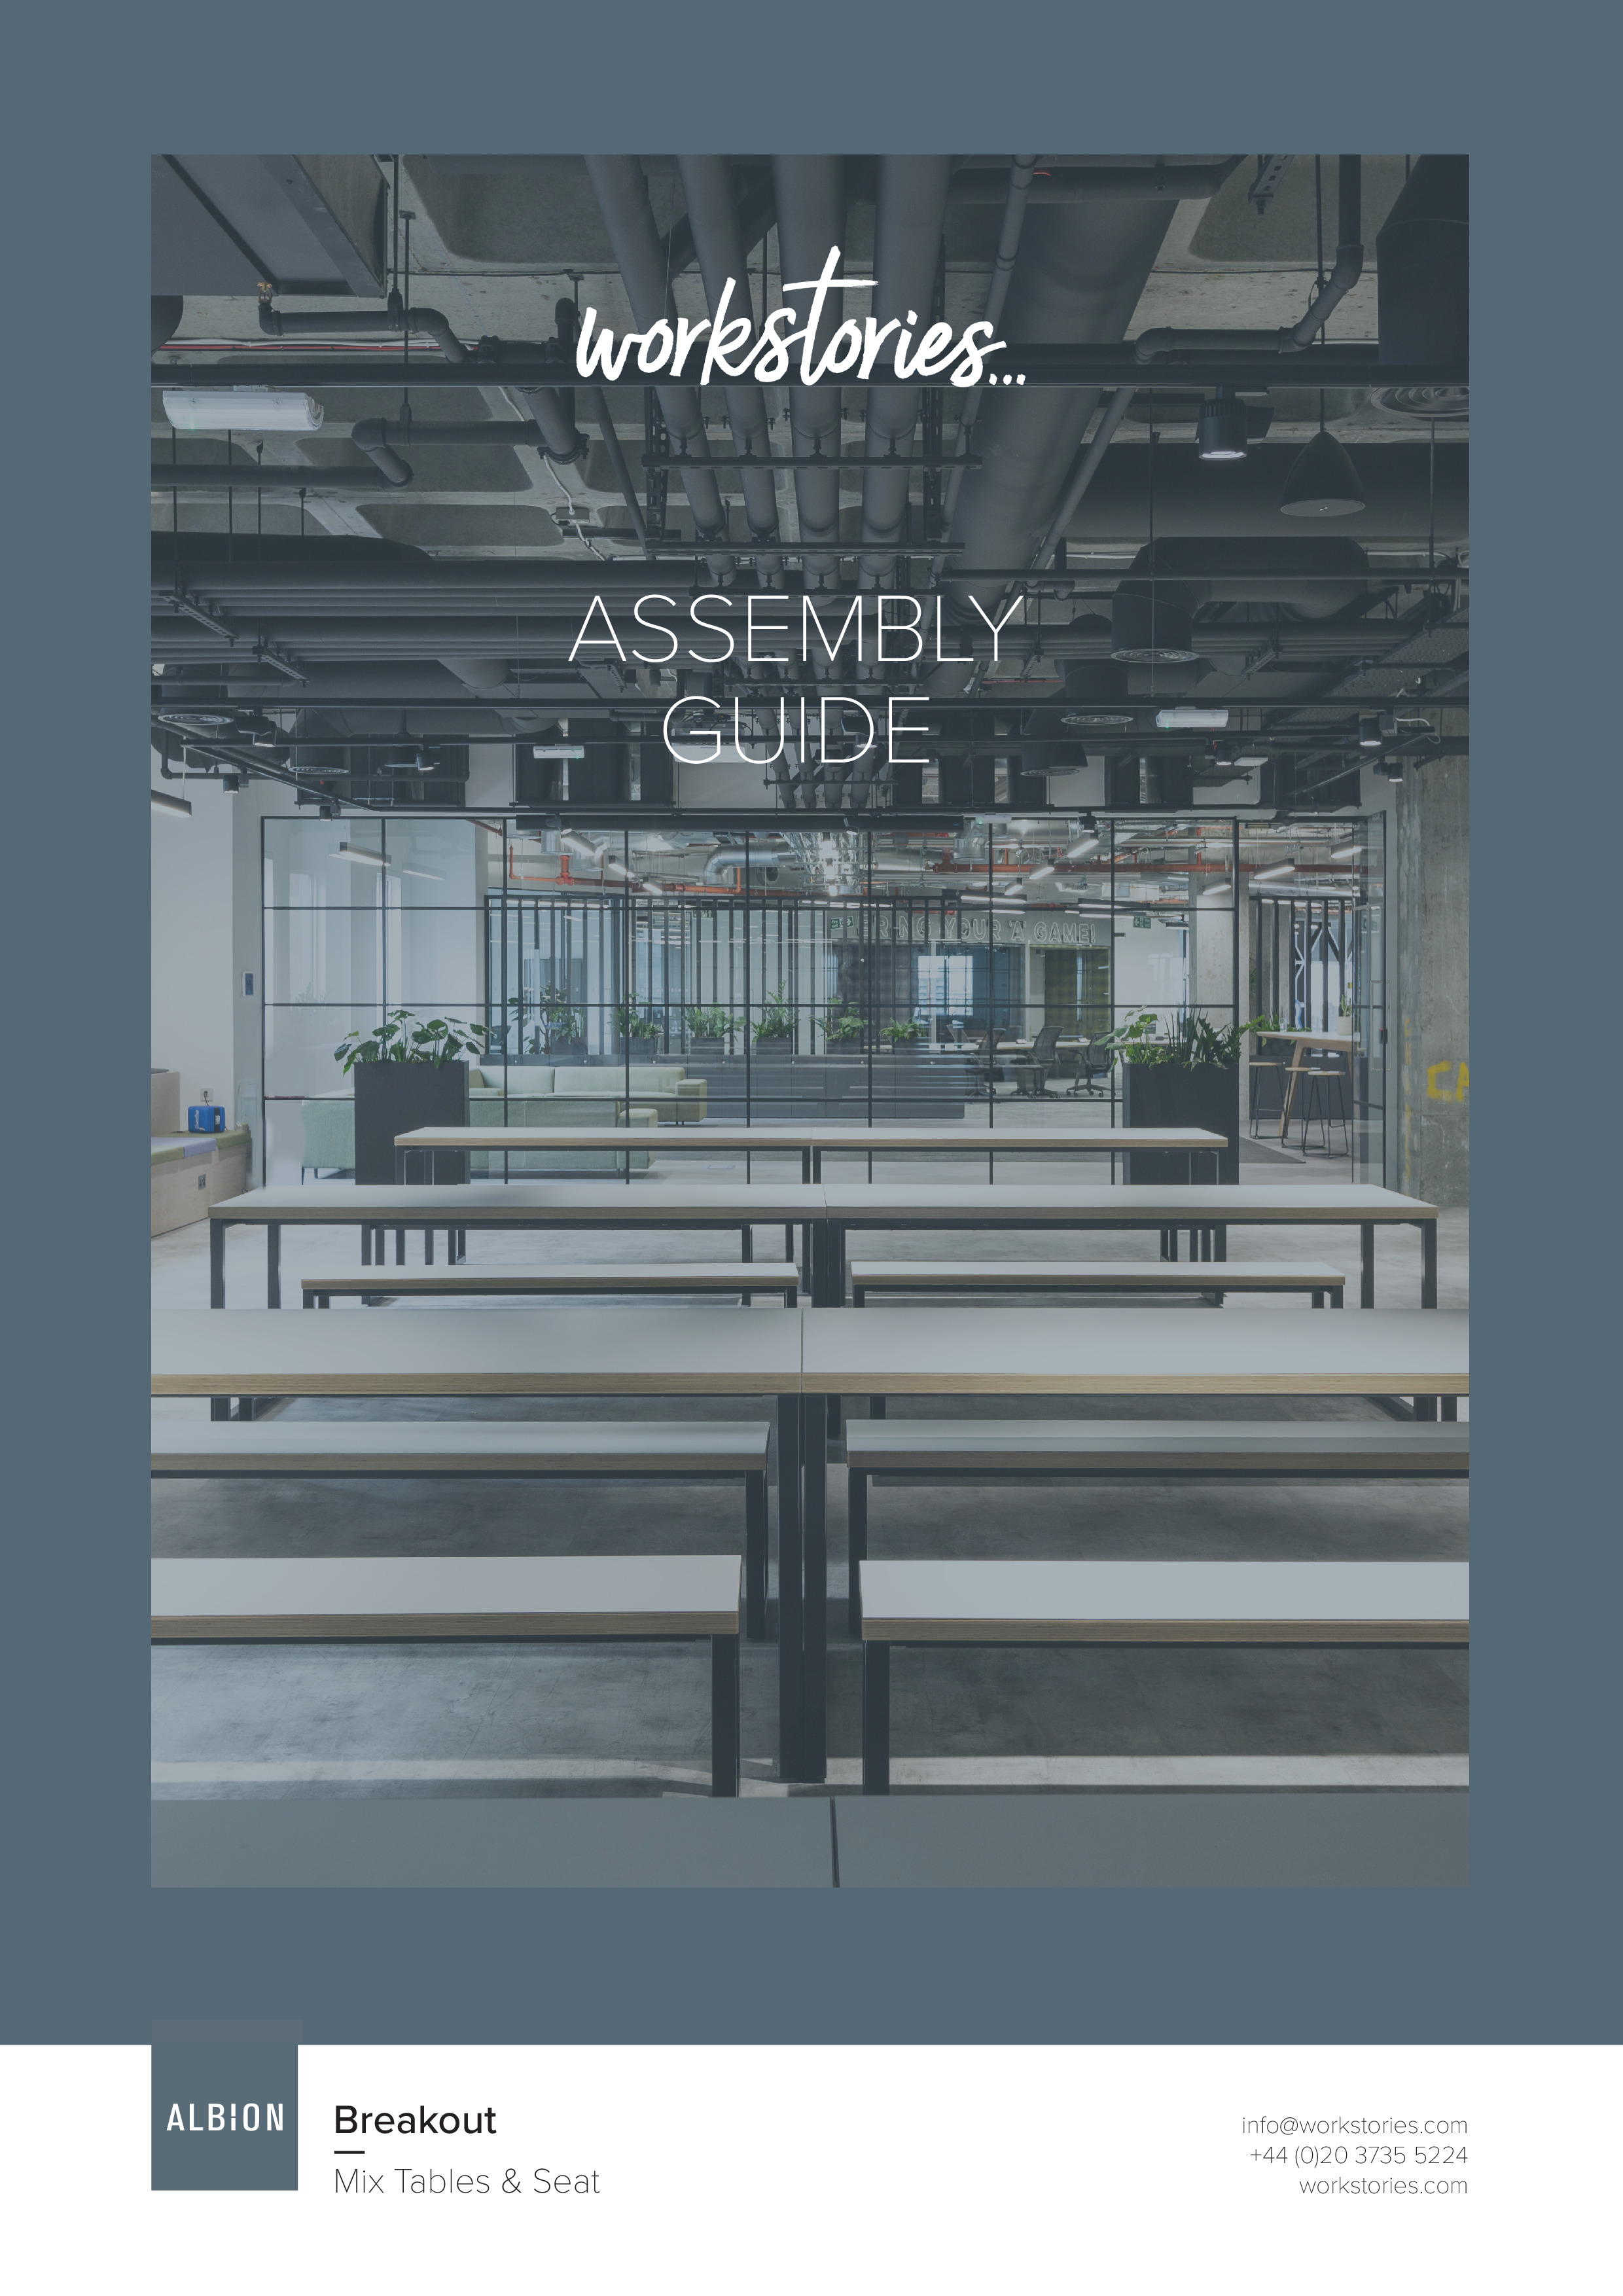 WS - ASSEMBLY GUIDE - Breakout - Mix Tables & Seat